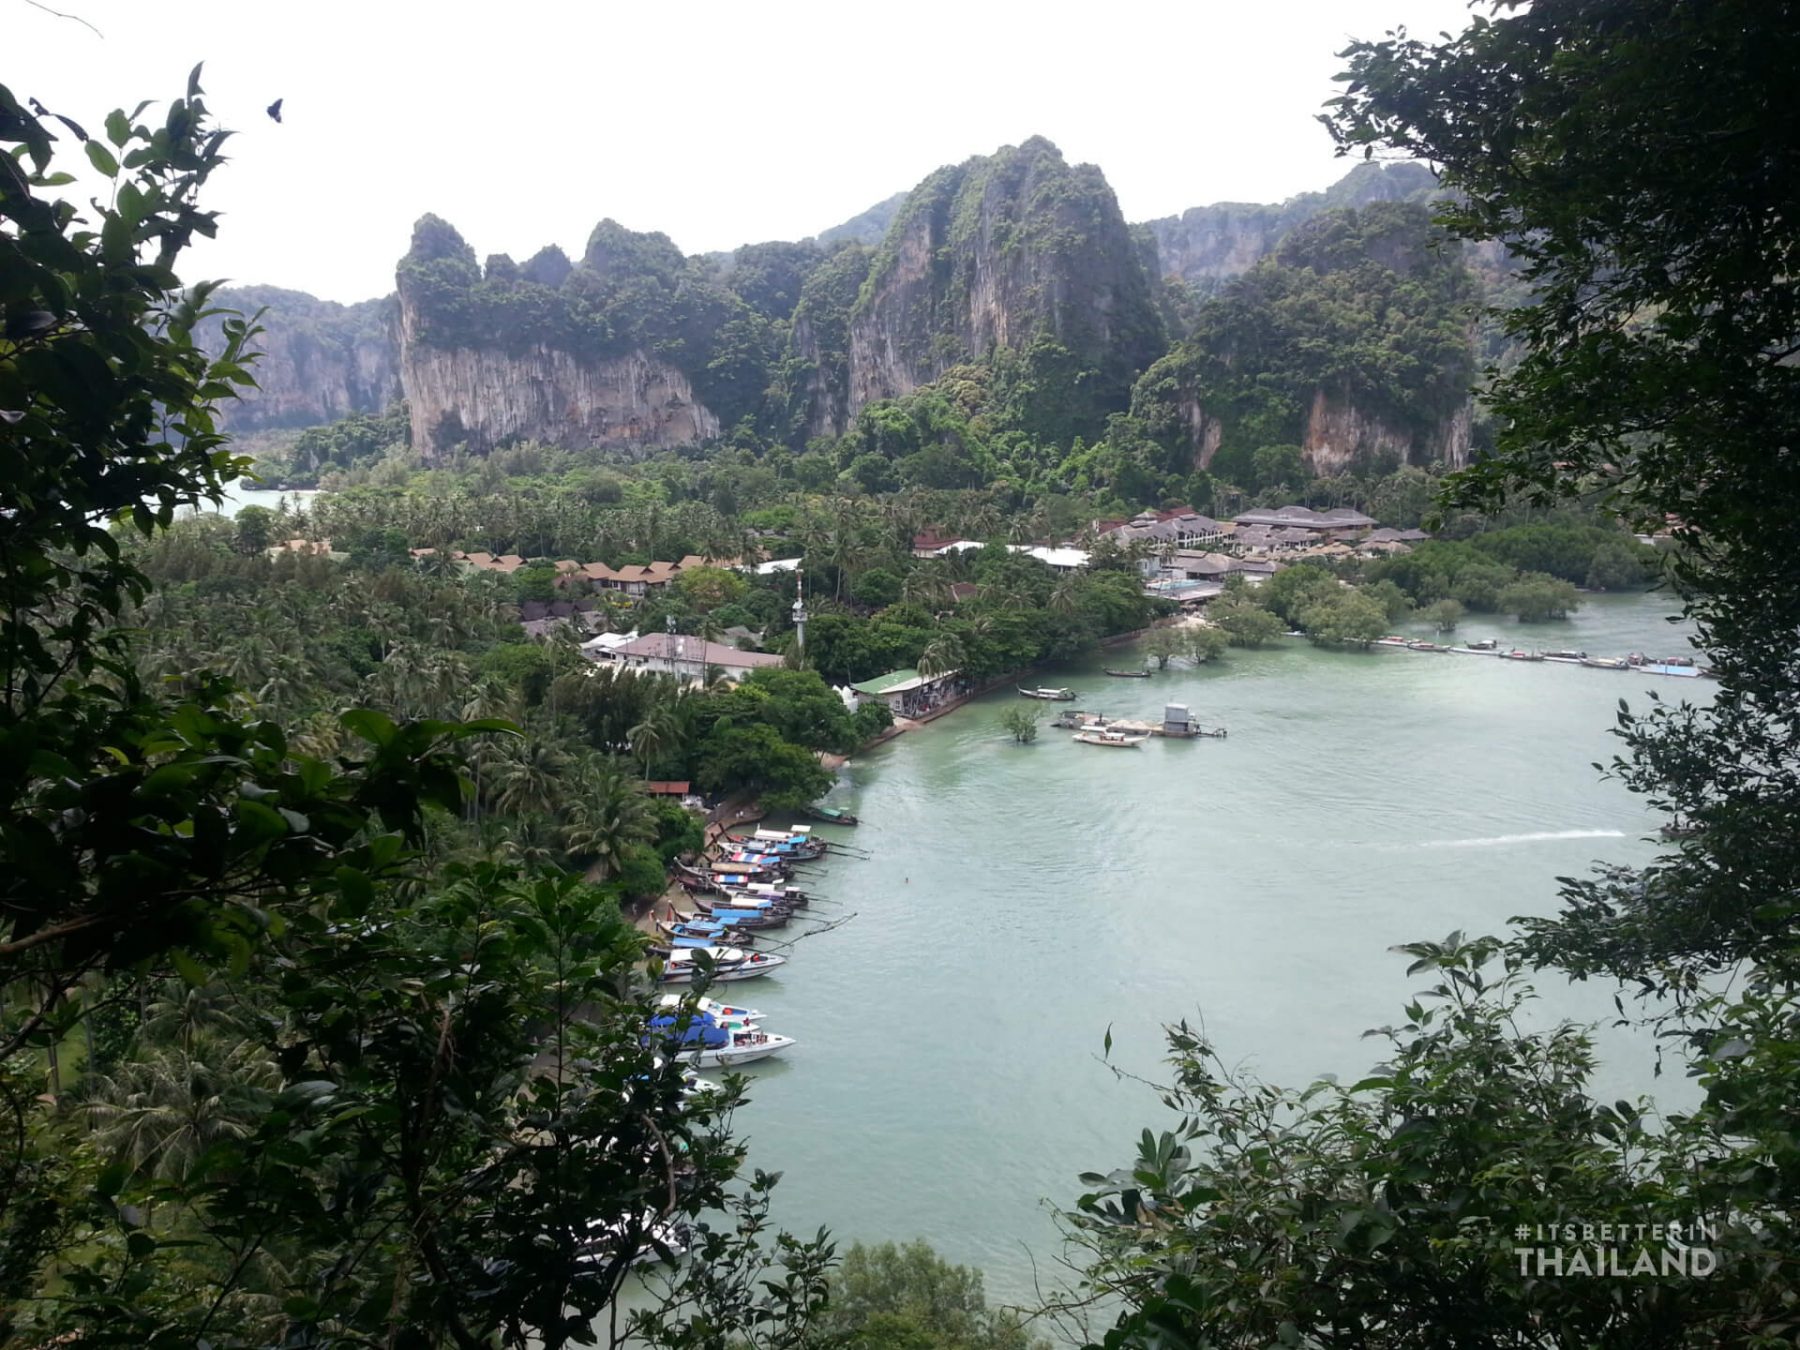 Railay Bay, Thailand from the viewpoint